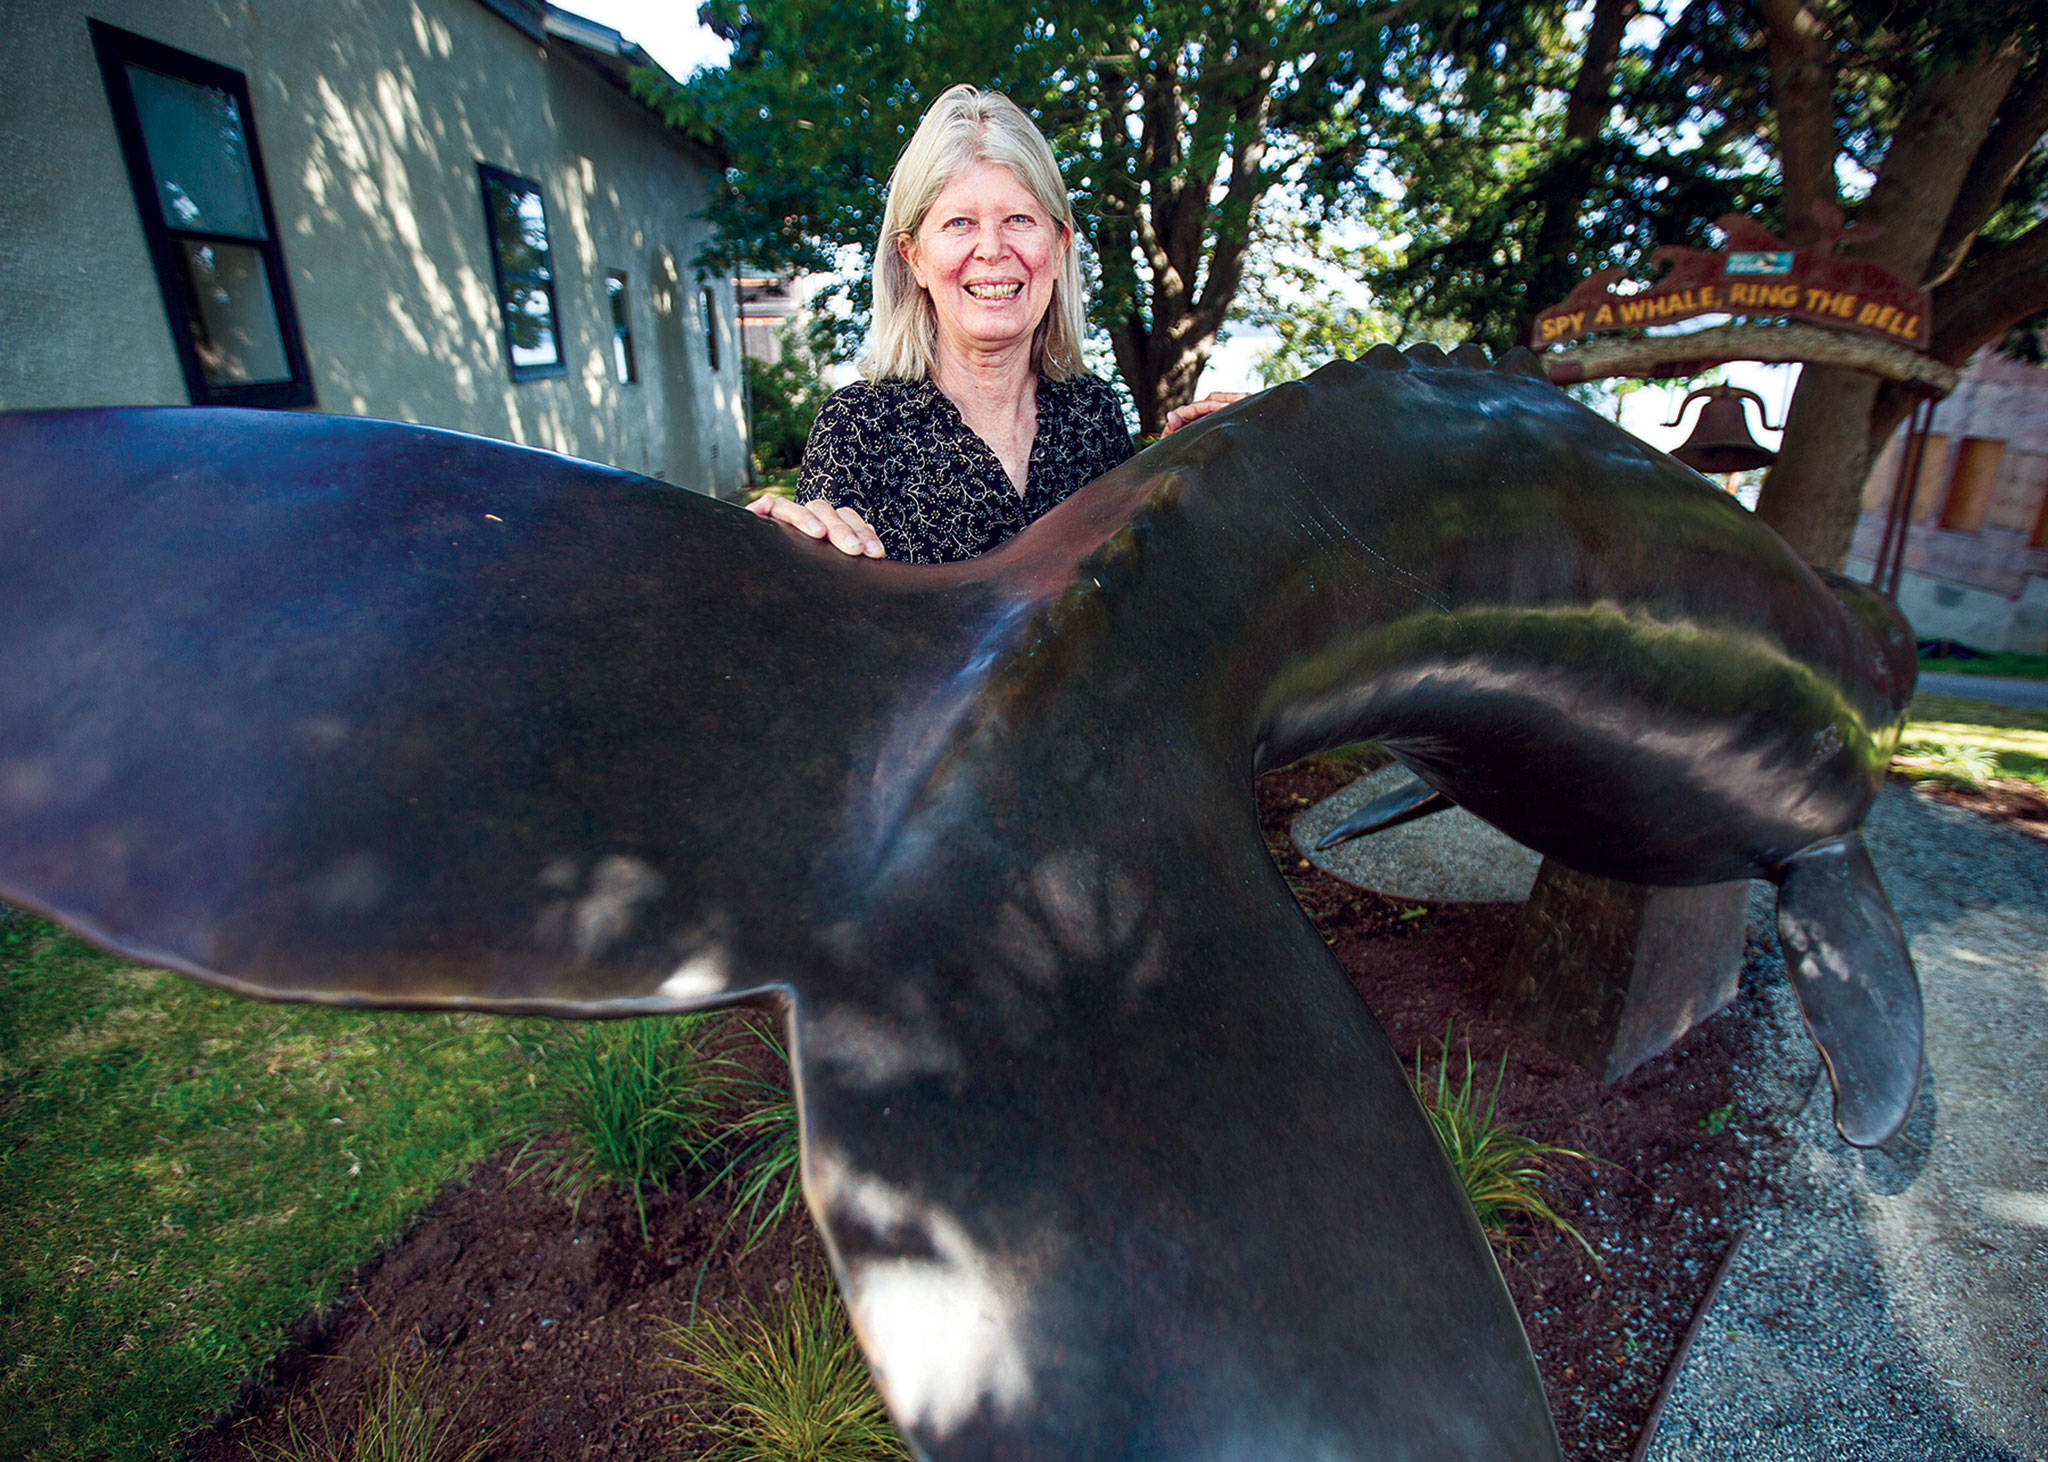 Georgia Gerber with her whale statue on display along First Street in Langley. (Olivia Vanni / The Herald)